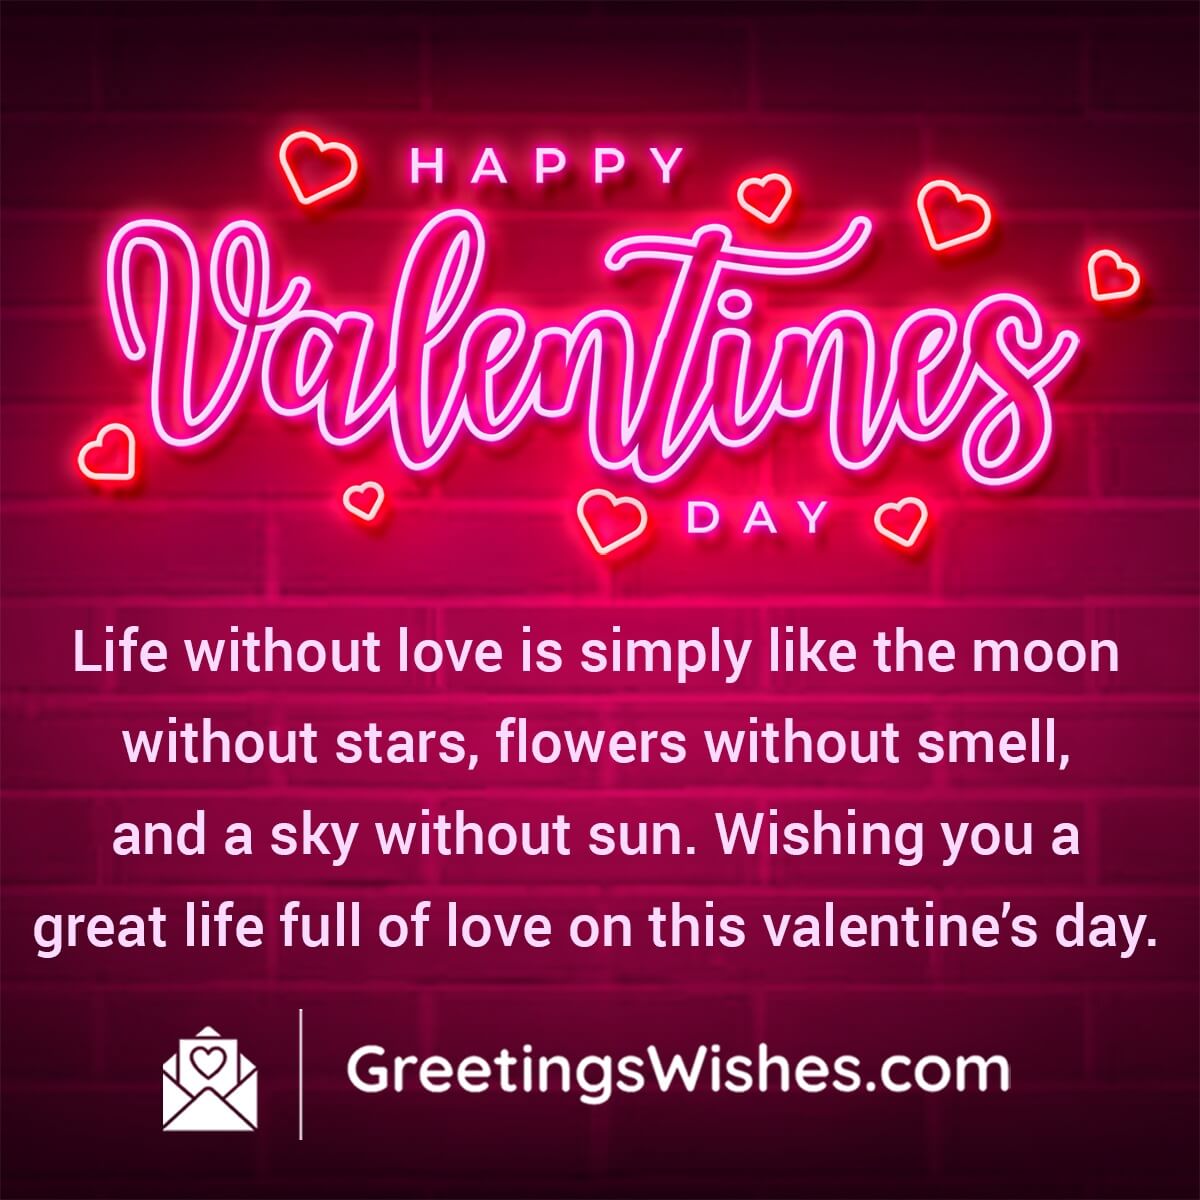 Valentines Day Wishes Messages ( 14th February) - Greetings Wishes